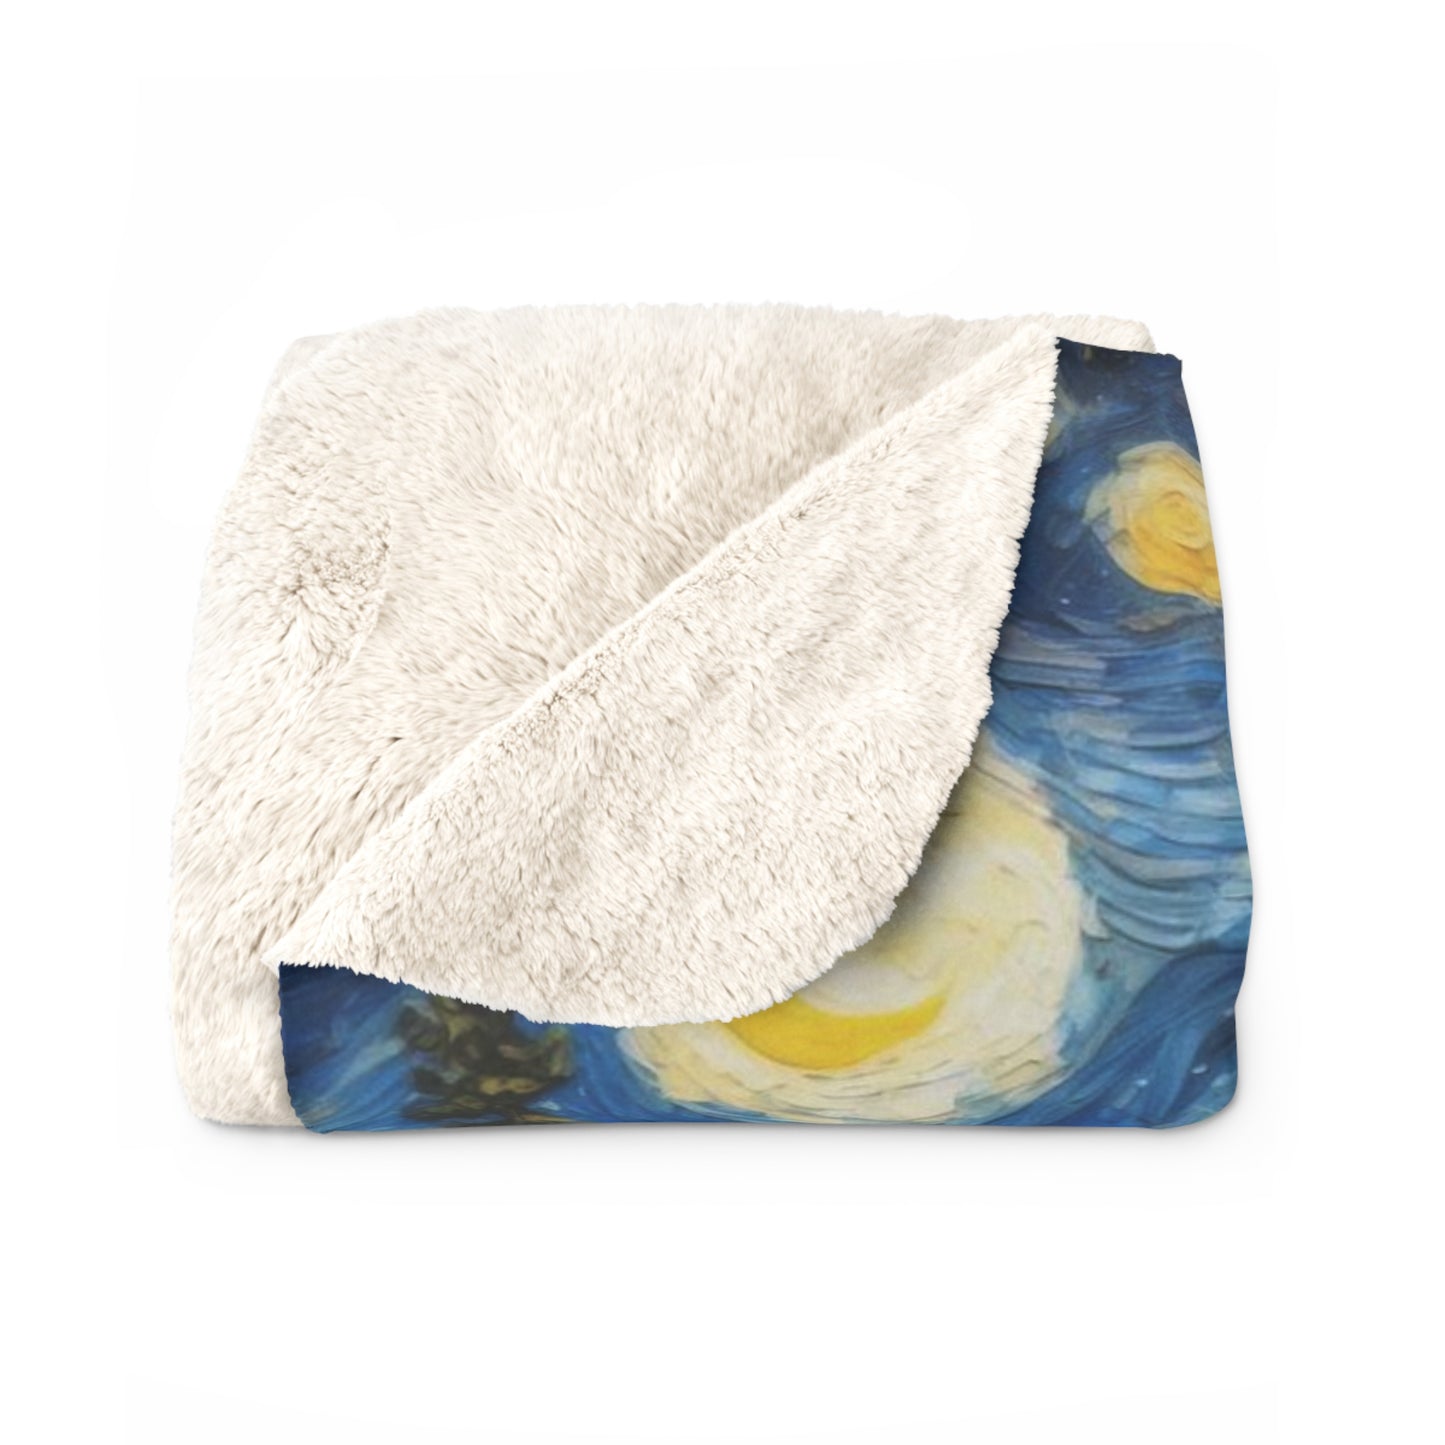 Crater Lake National Park Sherpa Blanket - The Starry Night